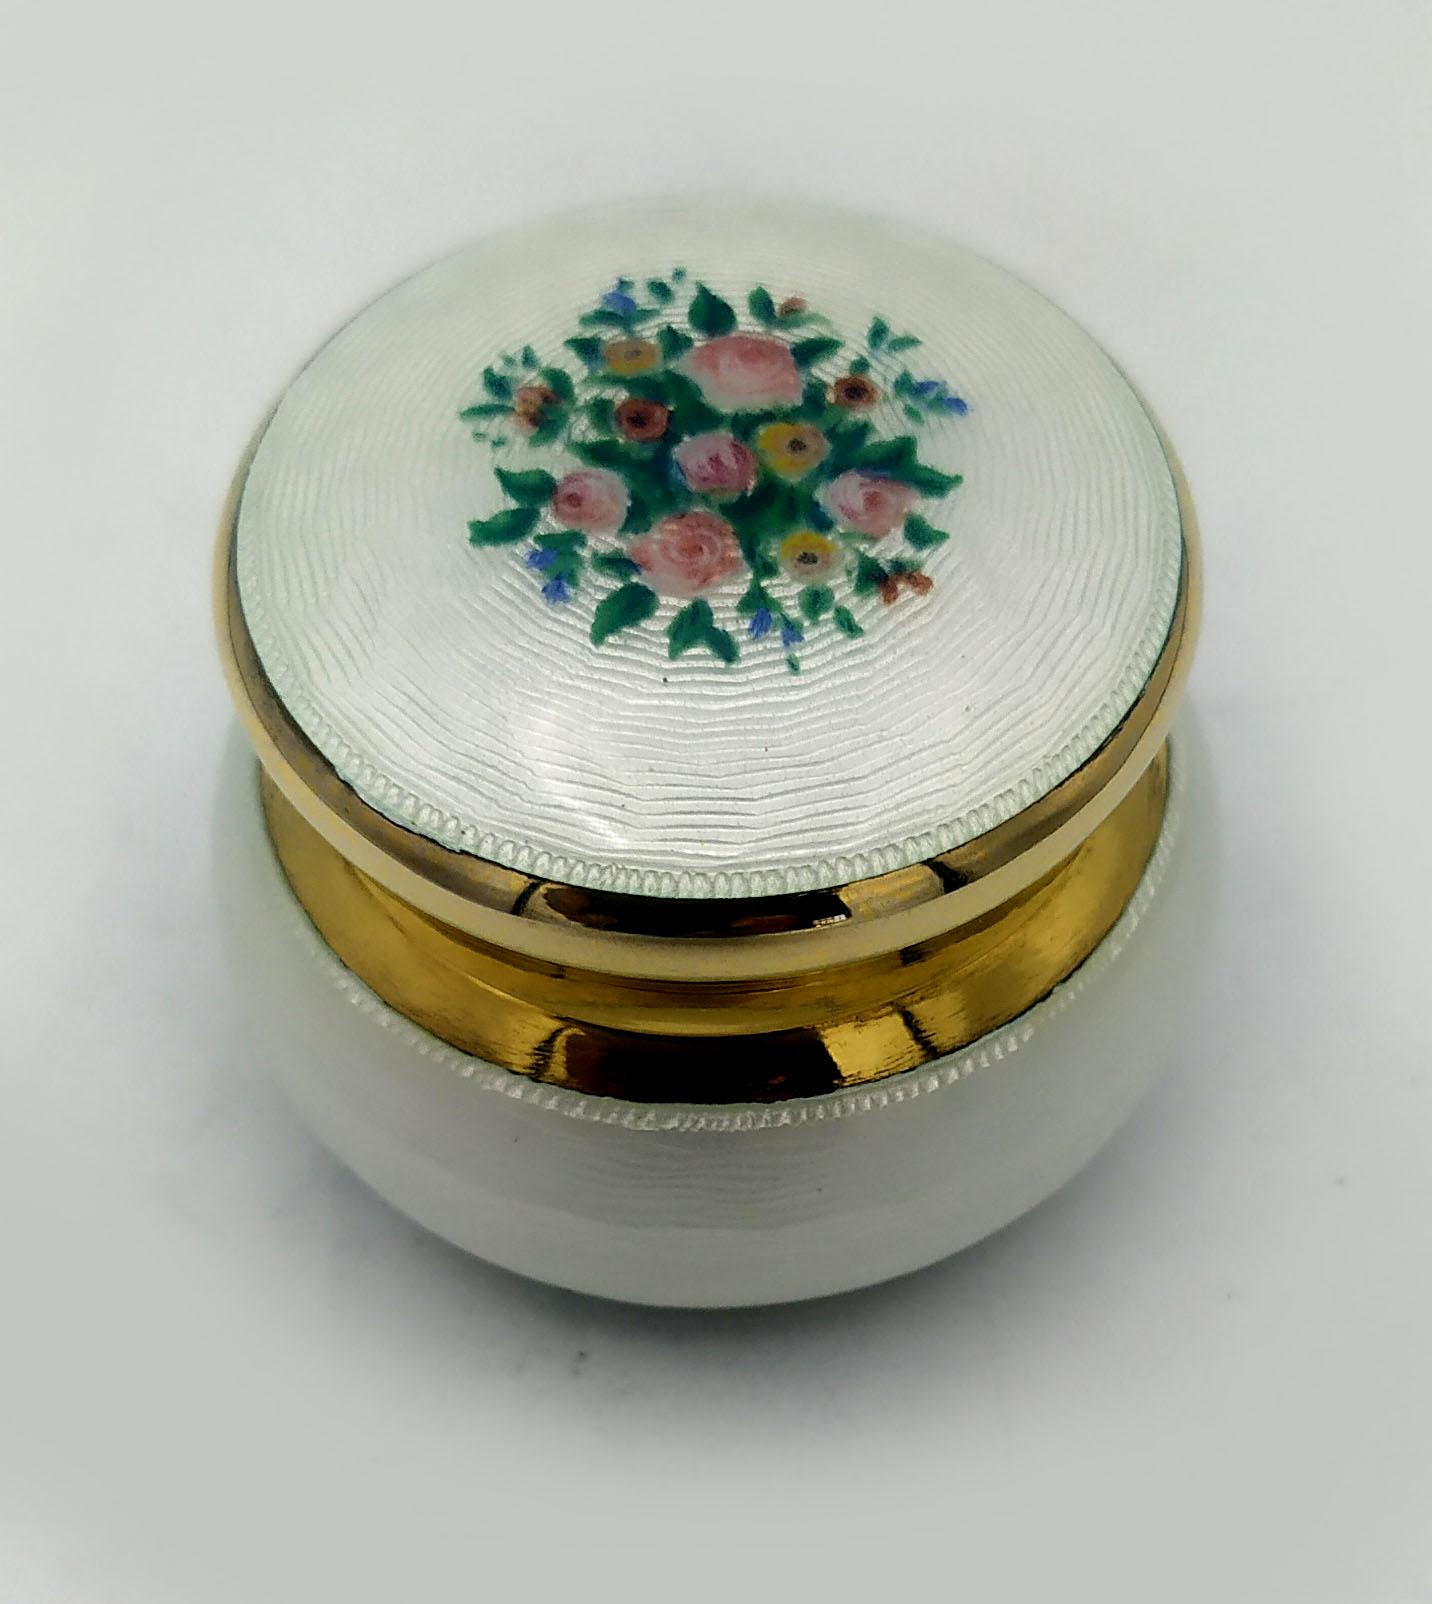 Round rounded pillbox in 925/1000 sterling silver gold plated with translucent fired enamel on guillochè and hand-painted floral miniature on the lid. Viennese Art Nouveau style. Diameter cm. 4.7 cm high. 3.1 weight gr. 64. Produced in various